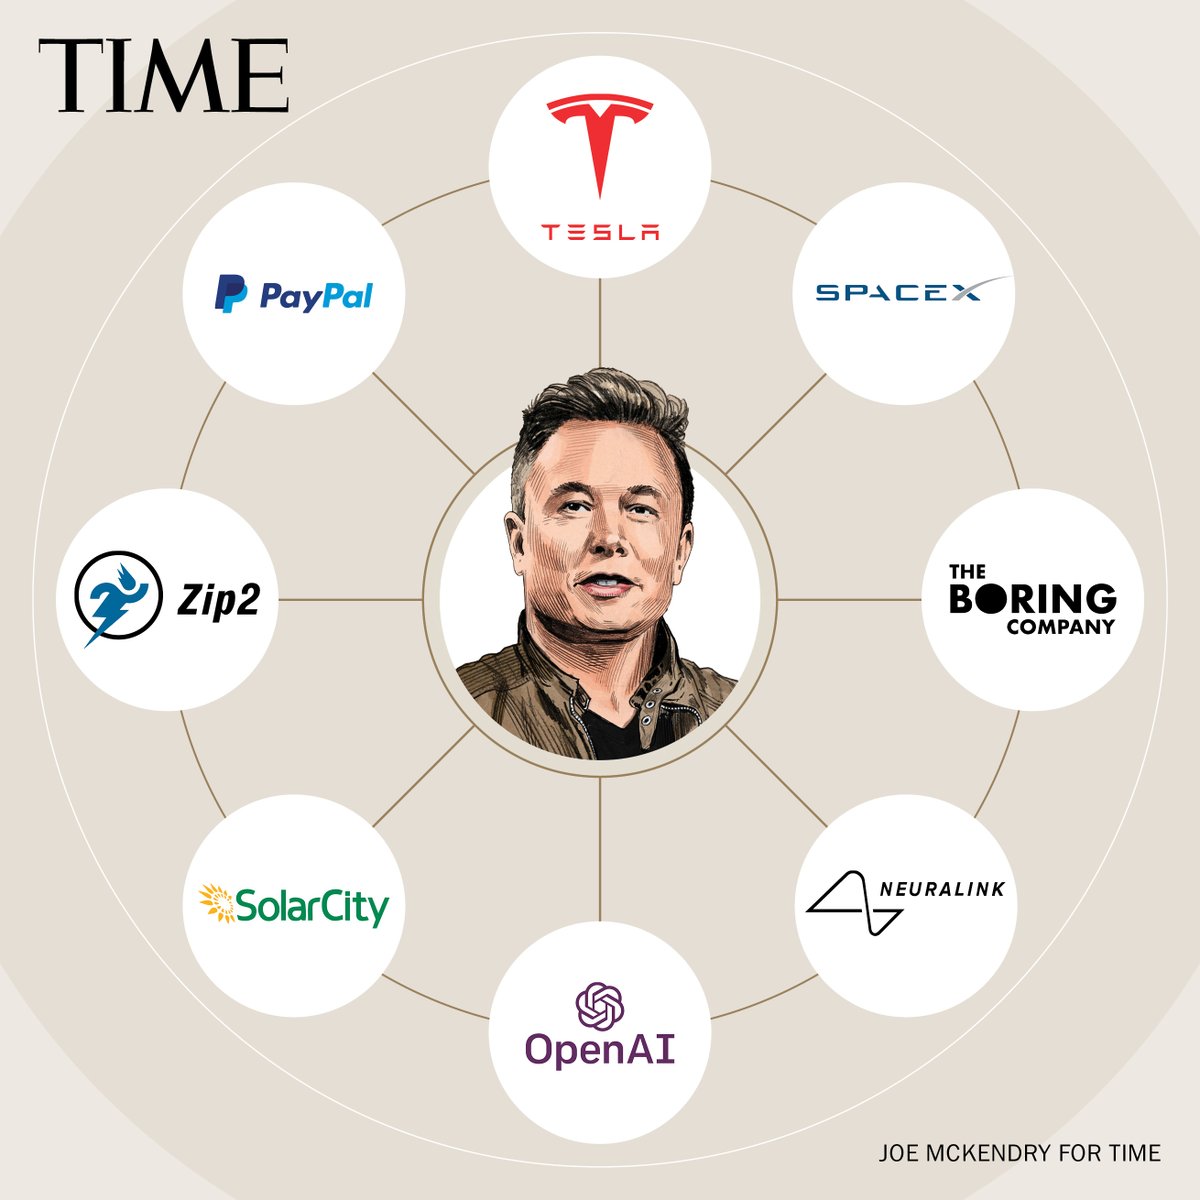 .@elonmusk's ventures have spanned everything from internet startups to sustainable energy to artificial intelligence. Here's how the world's richest person built his fortune #TIMEPOY ti.me/3DKOKhW